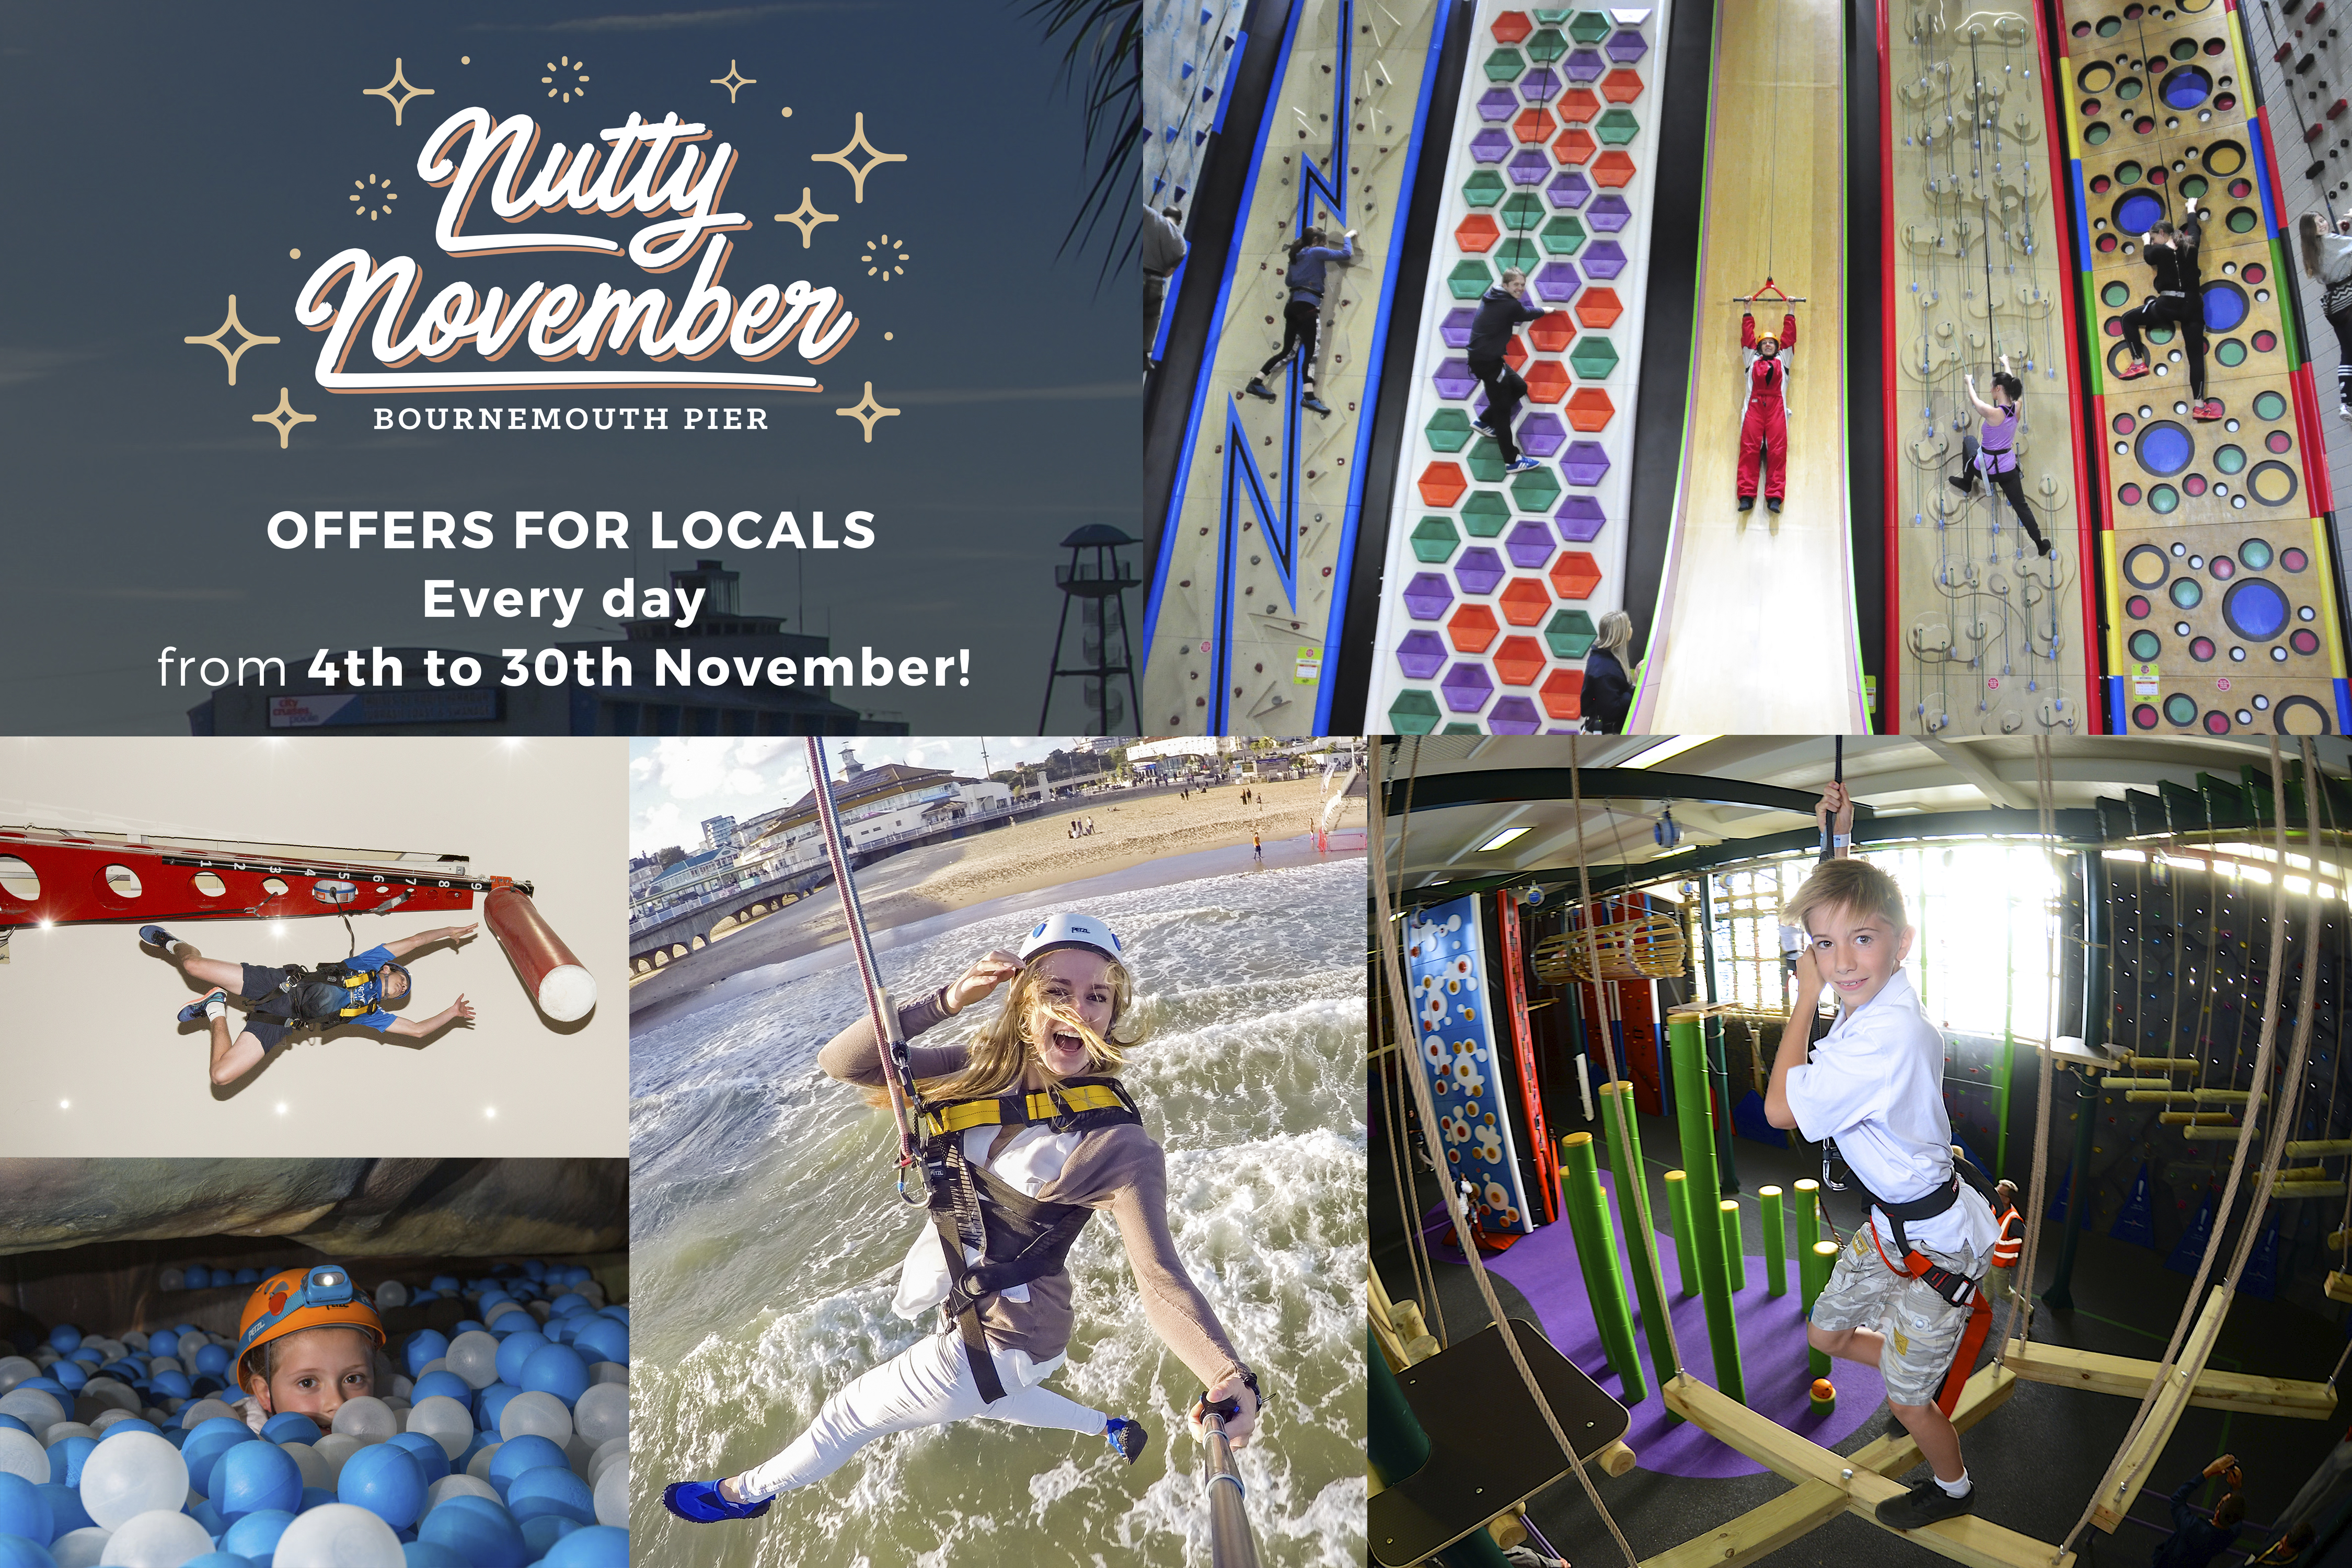 It’s ‘Nutty November’ on Bournemouth Pier – HALF PRICE offers on the Zip Wire, and climbing at RockReef!